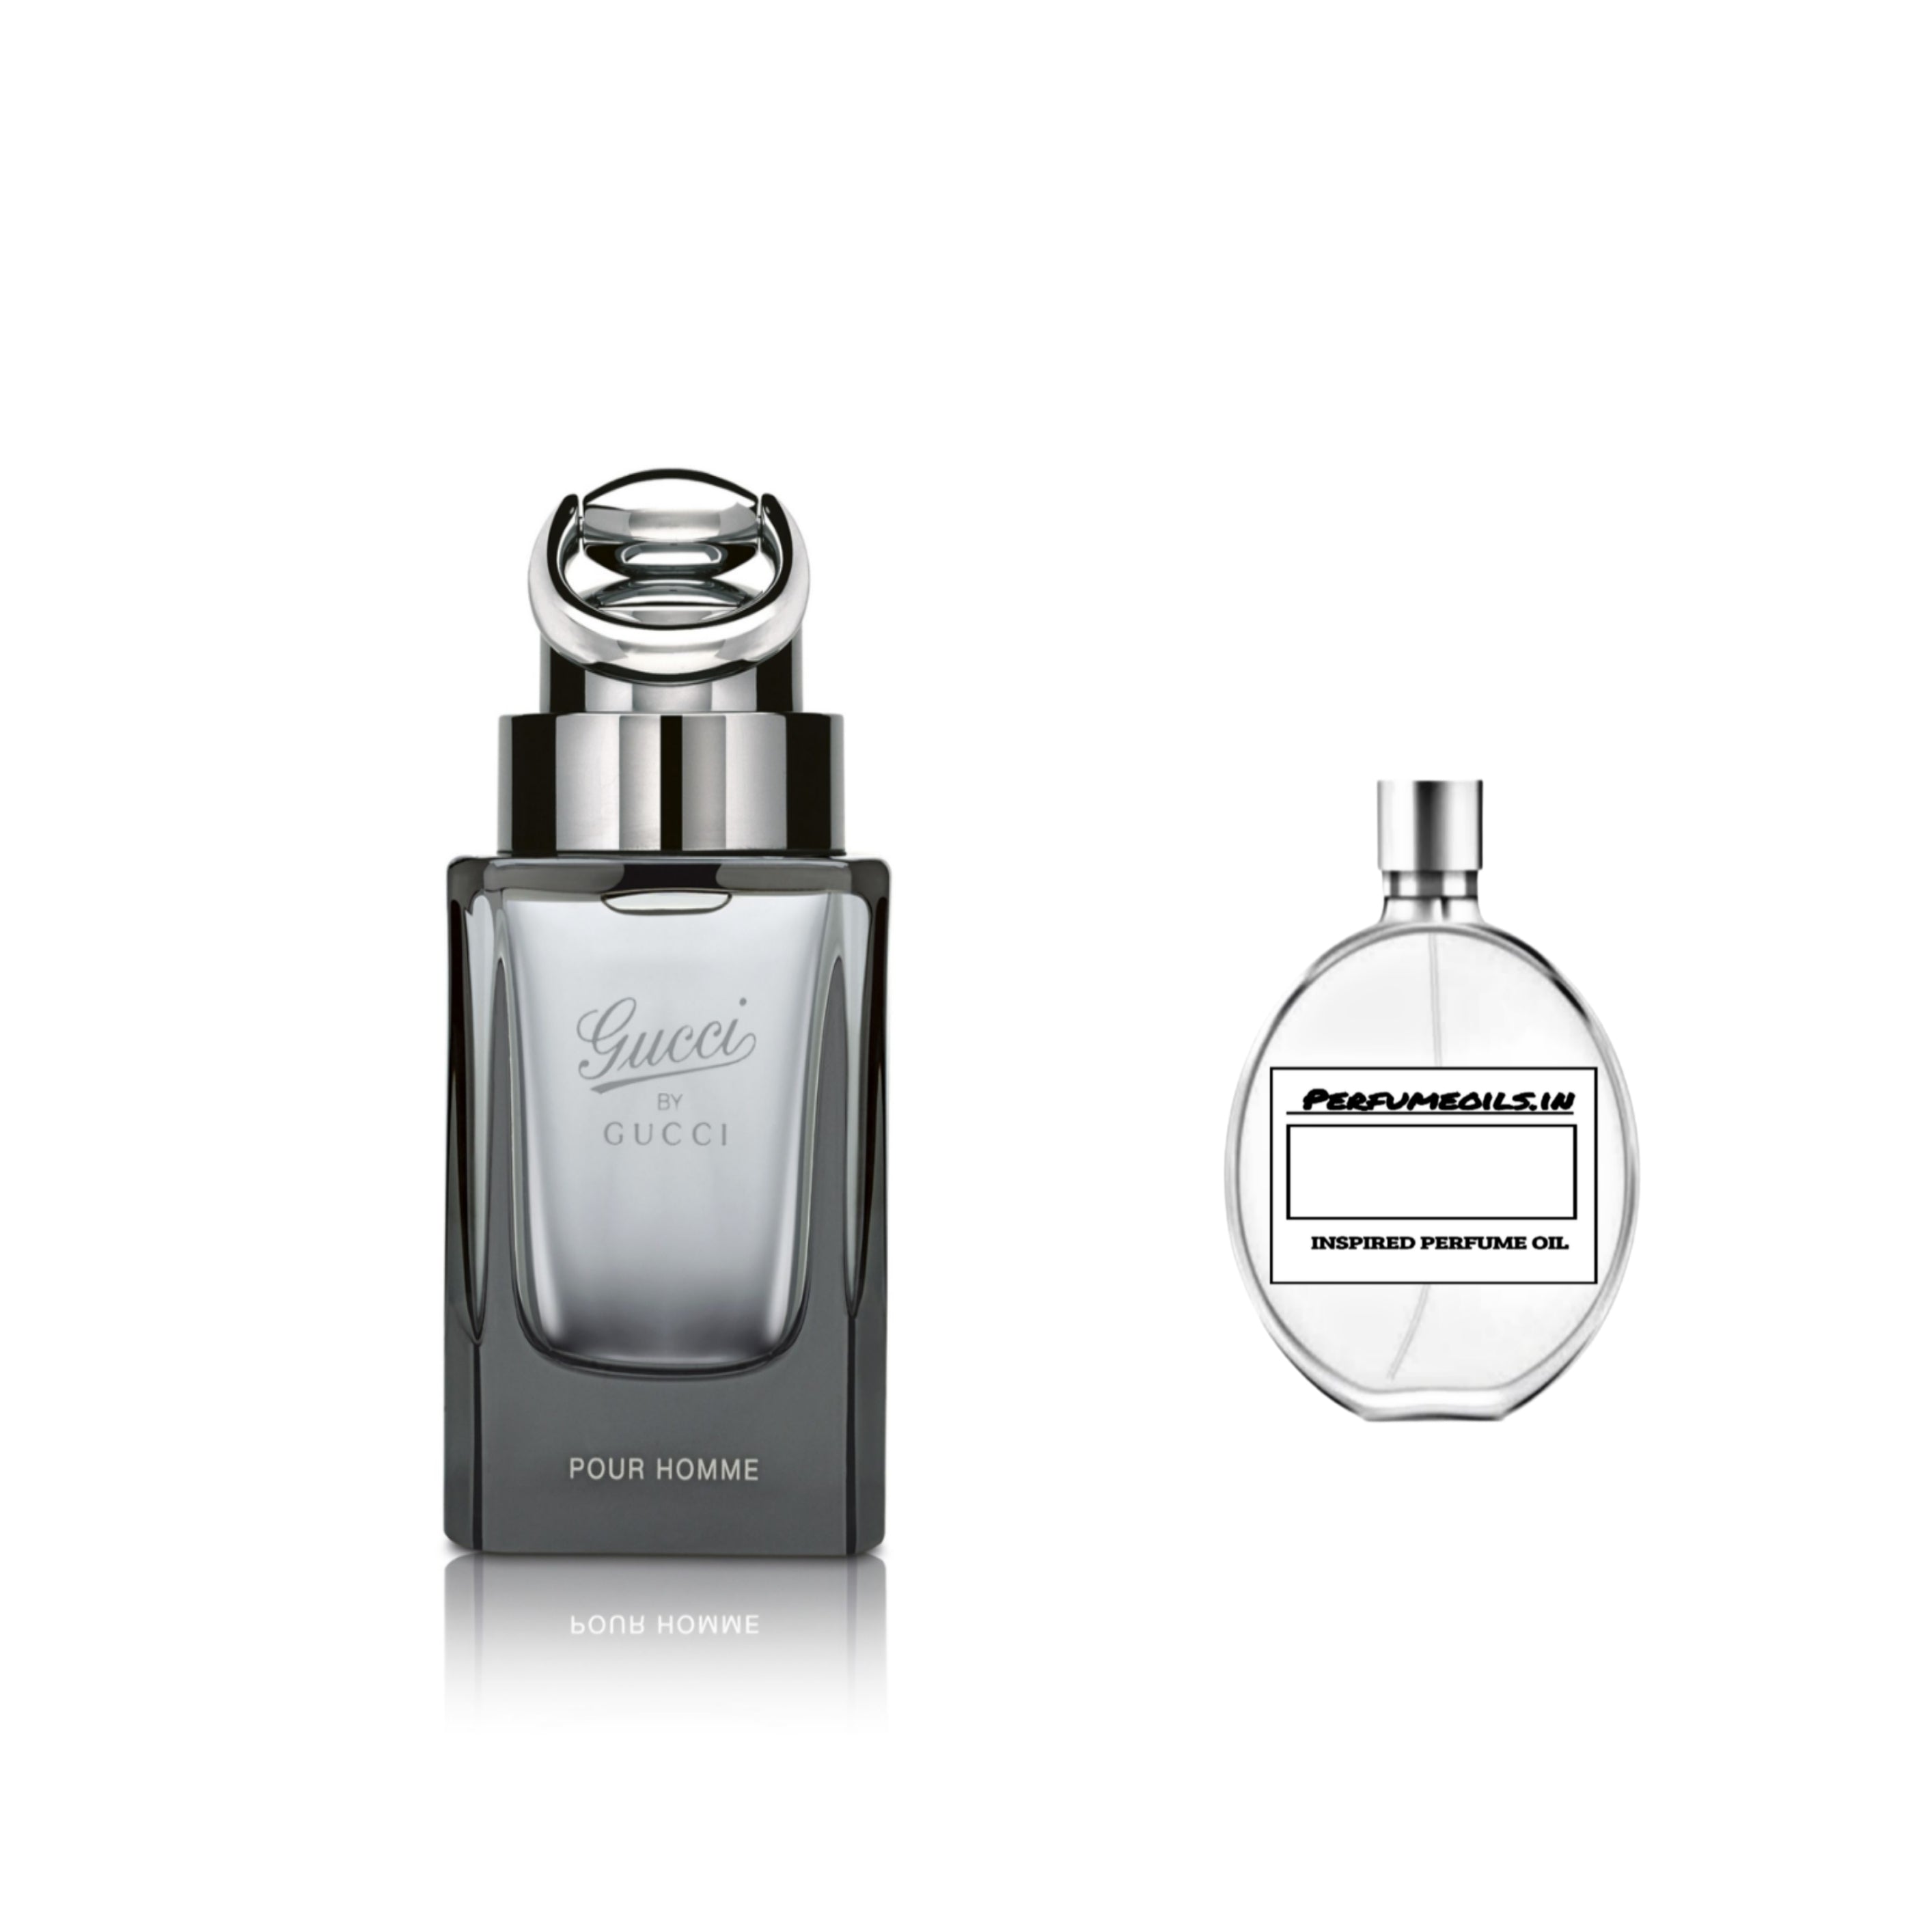 Gucci Gucci Guilty Pour Homme Travel Spray Duo Set